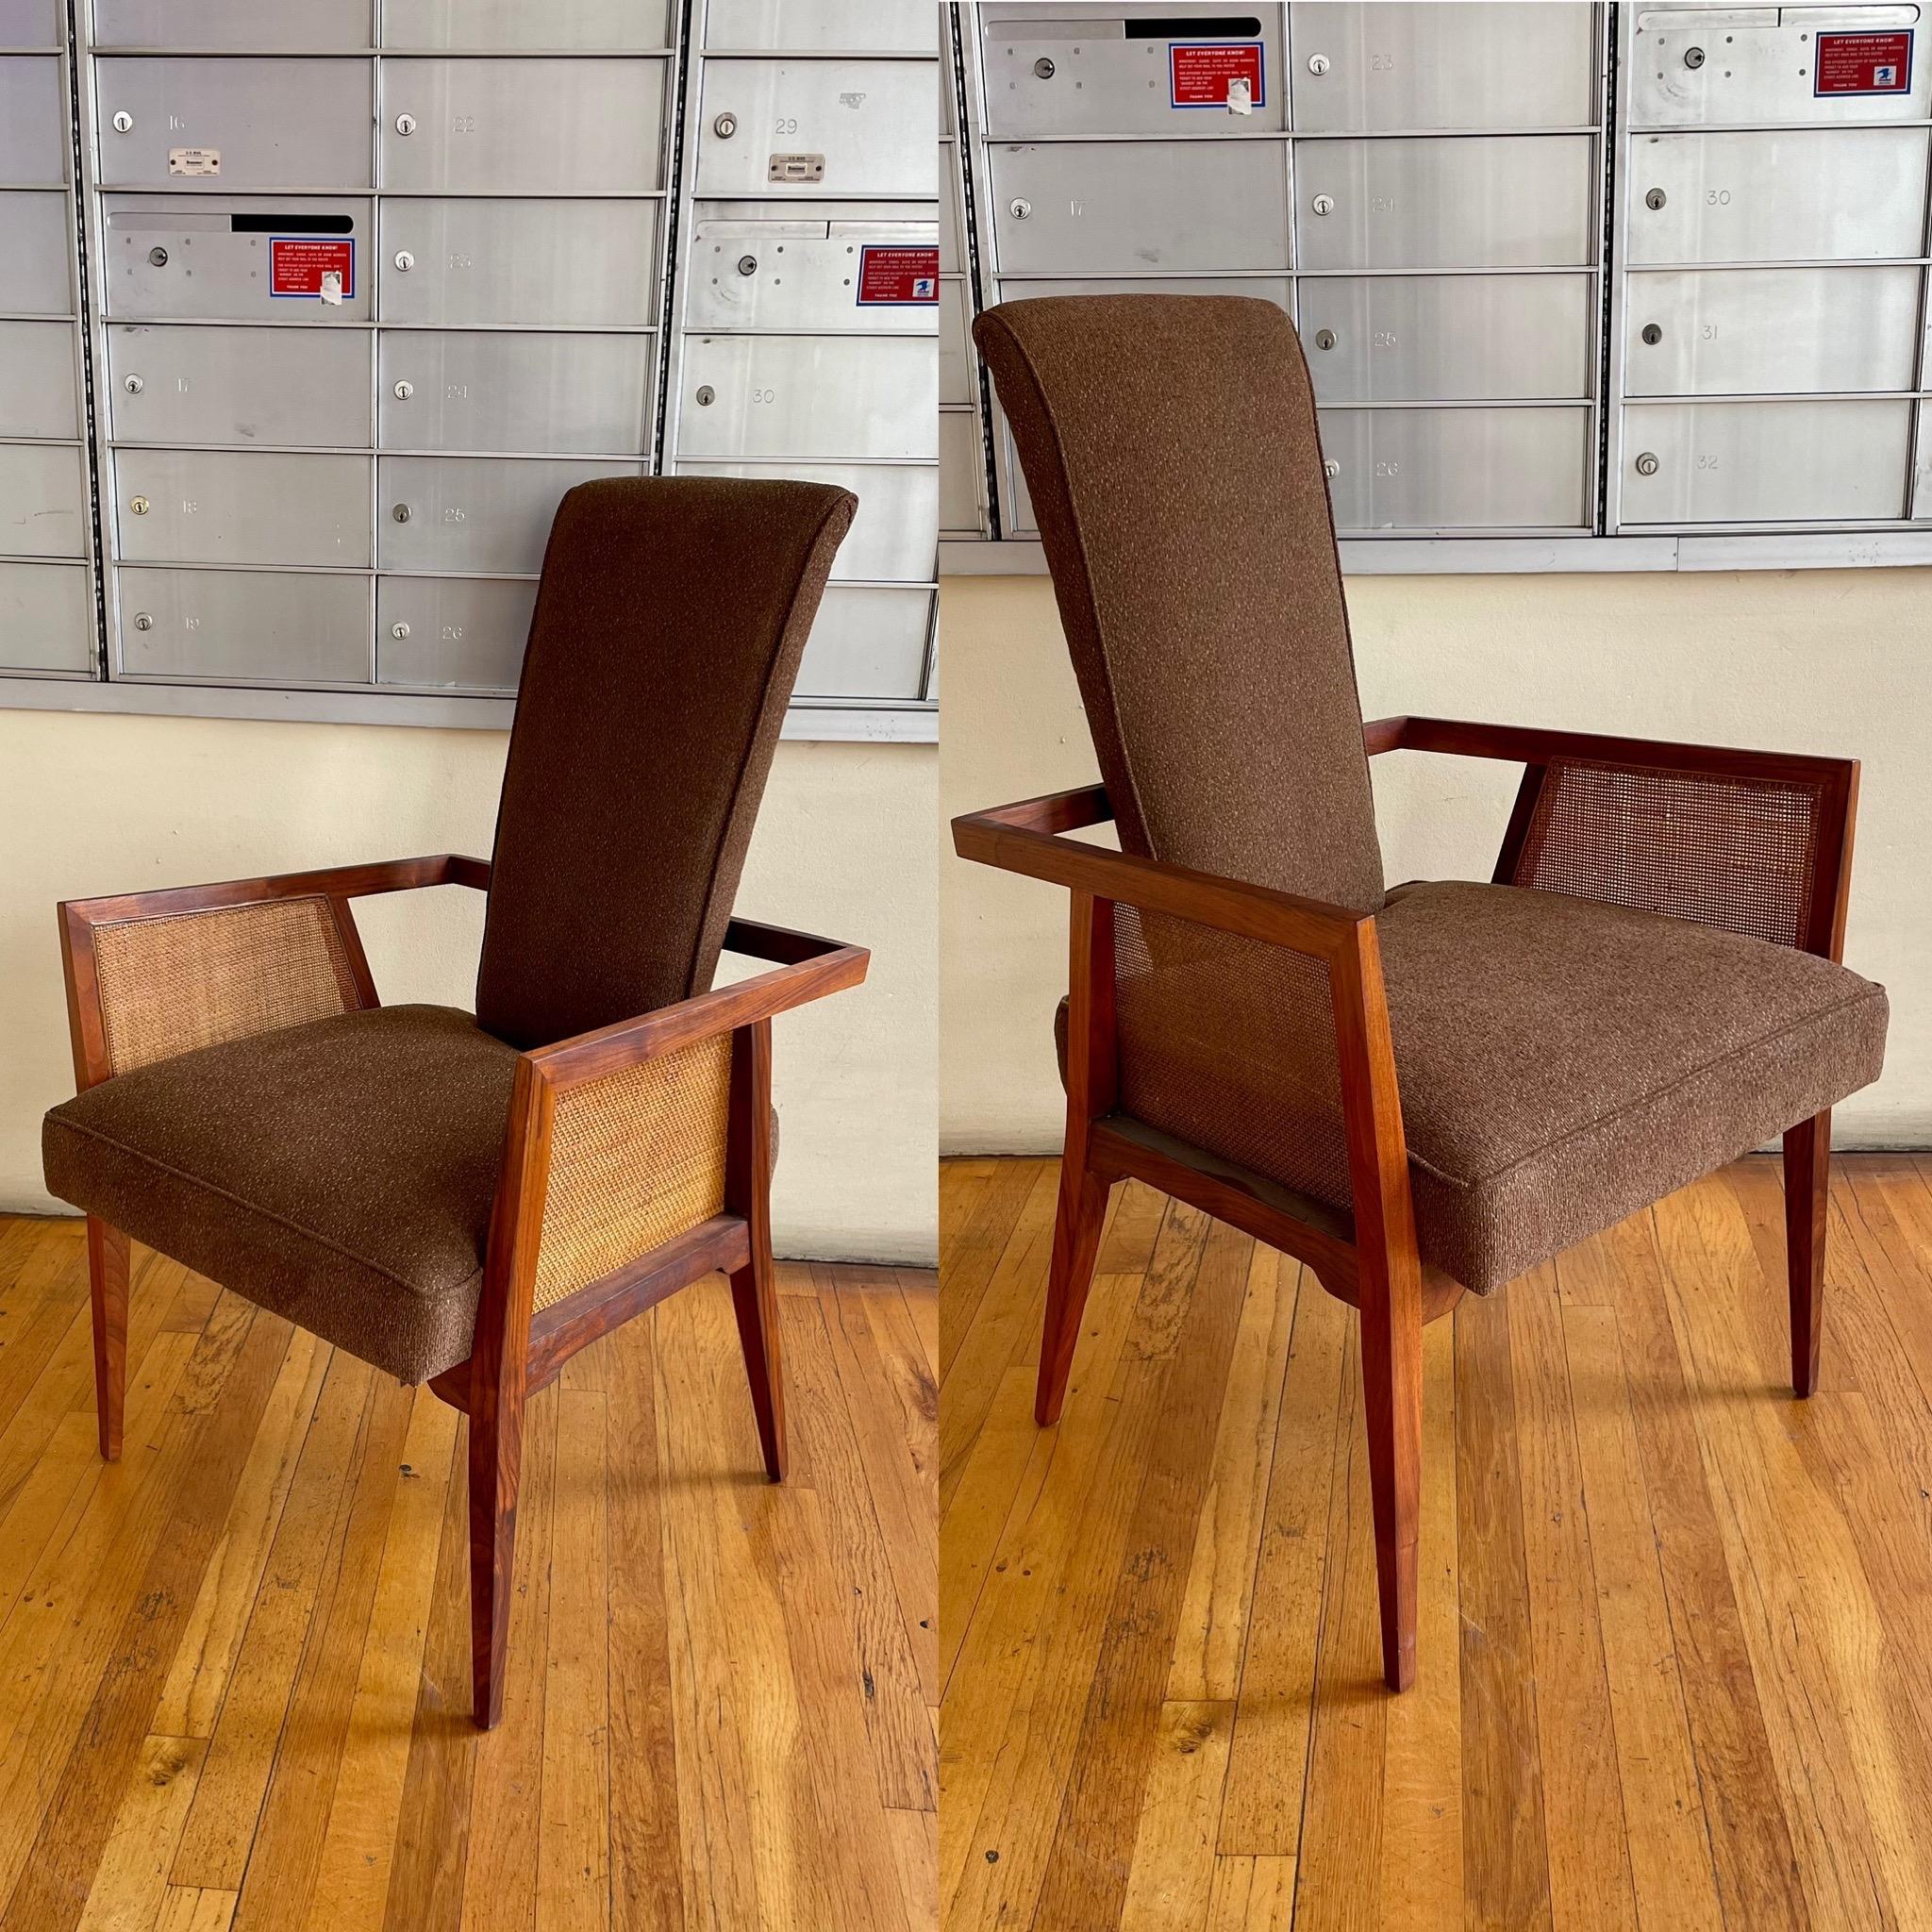 Beautiful pair of stylish American walnut & cane armchairs by Foster-McDavid, solid walnut with cane sides freshly recover solid and sturdy circa the 1970s, great condition solid and sturdy tall backs rare to find.
  